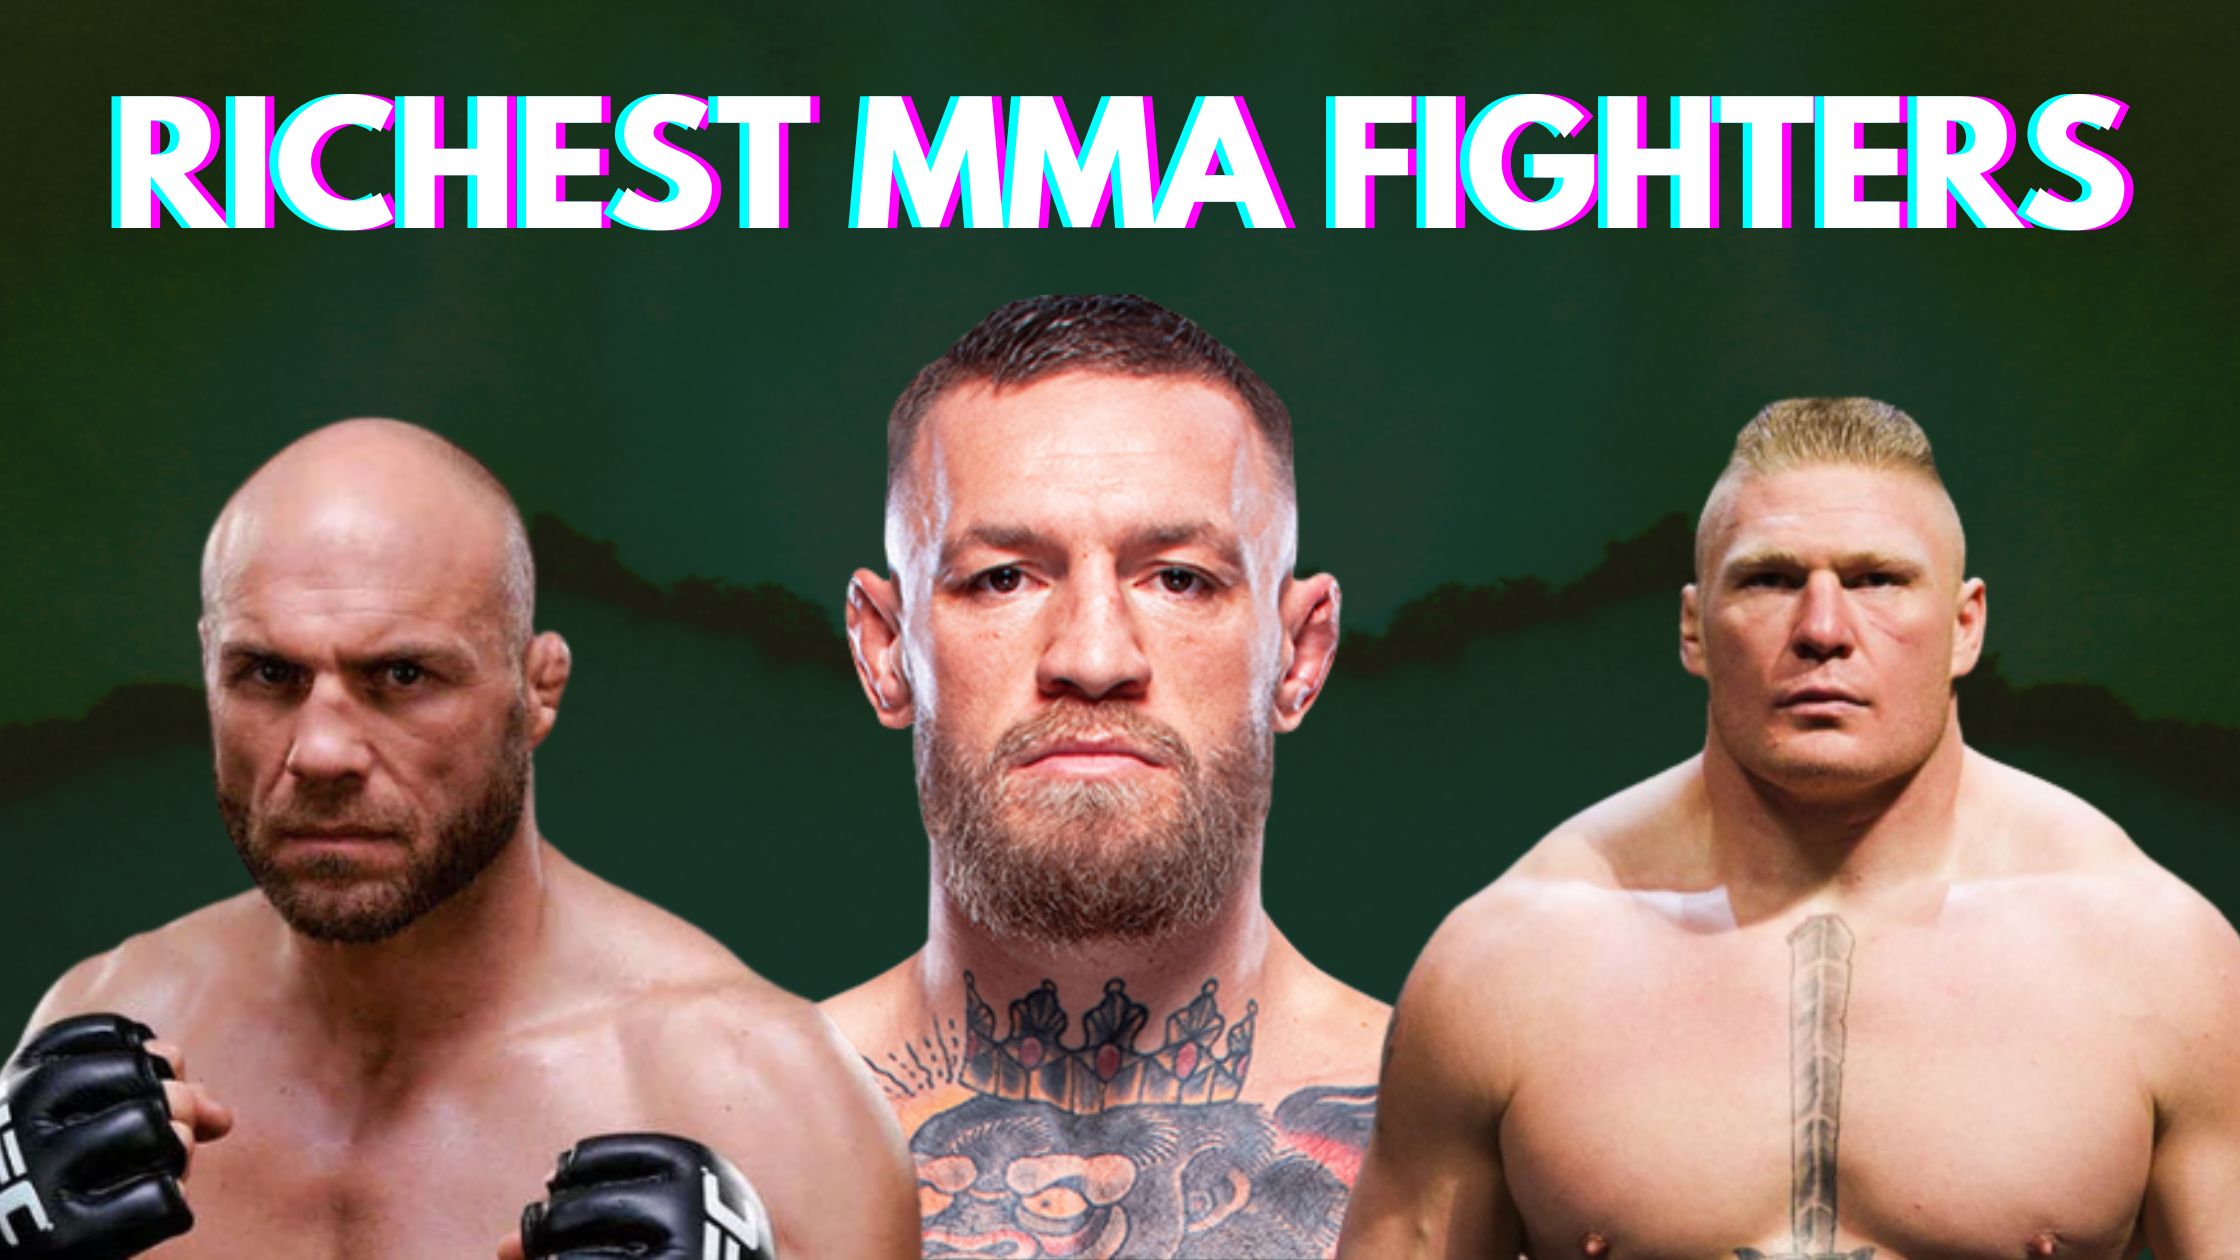 Top 10 Richest MMA Fighters In the World